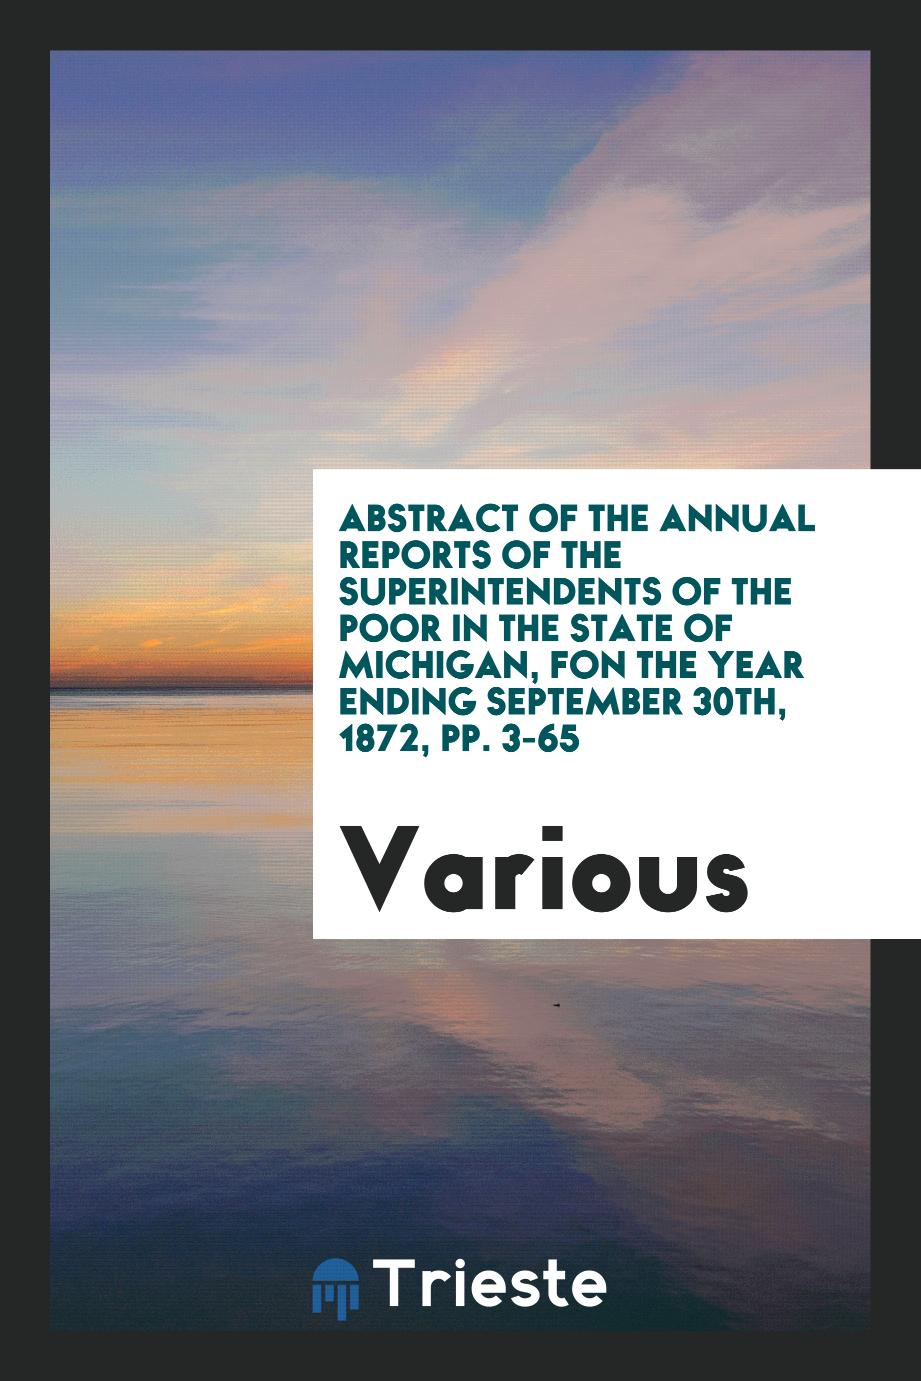 Abstract of the Annual Reports of the Superintendents of the Poor in the State of Michigan, fon the year ending september 30th, 1872, pp. 3-65